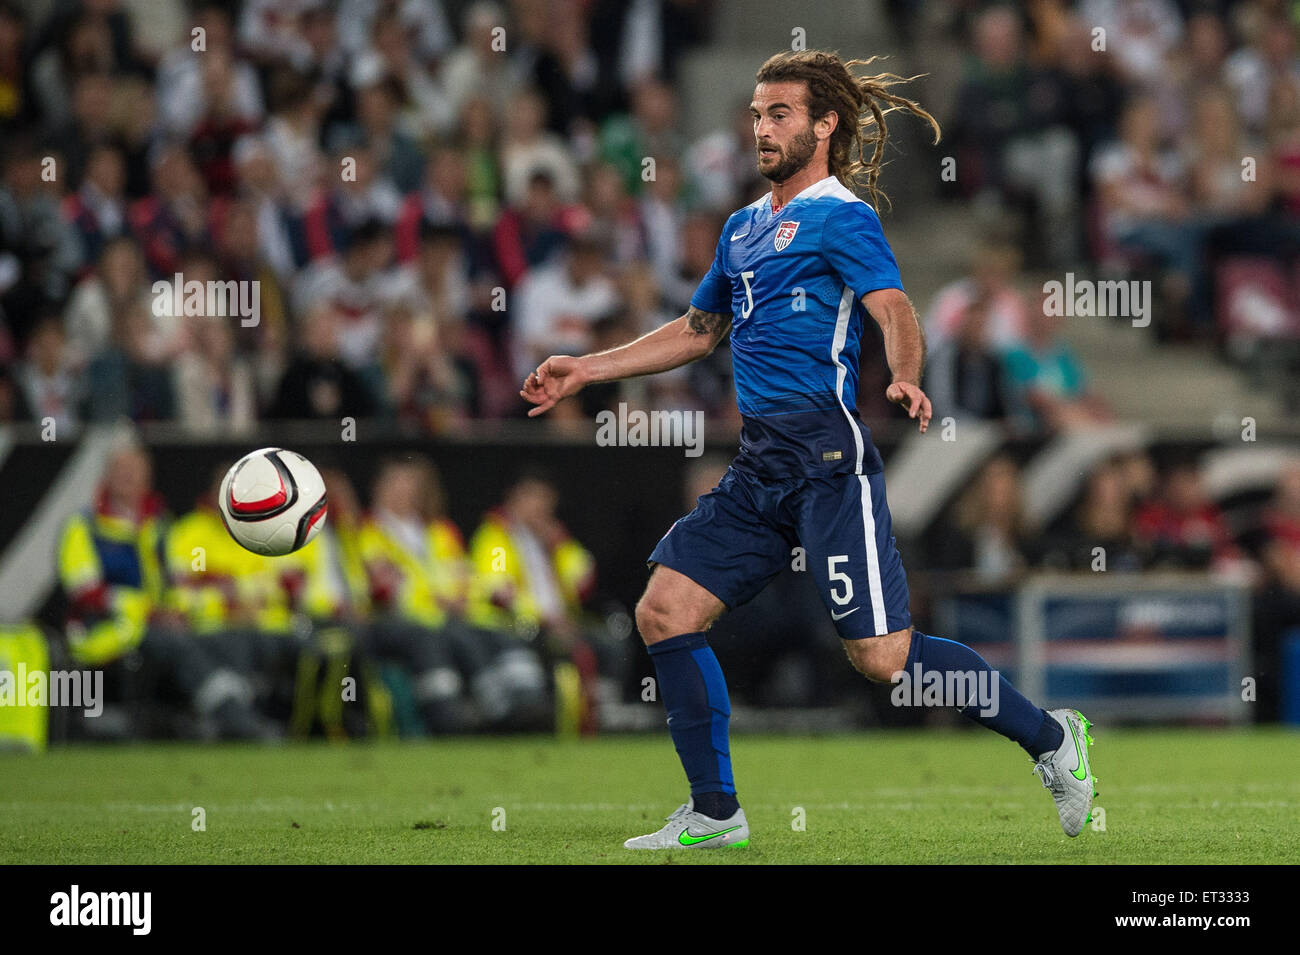 Cologne, Germany. 10th June, 2015. USA's Kyle Beckerman in action at the international soccer match between Germany and the USA in the RheinEnergie Stadium in Cologne, Germany, 10 June 2015. Photo: Maja Hitij/dpa/Alamy Live News Stock Photo